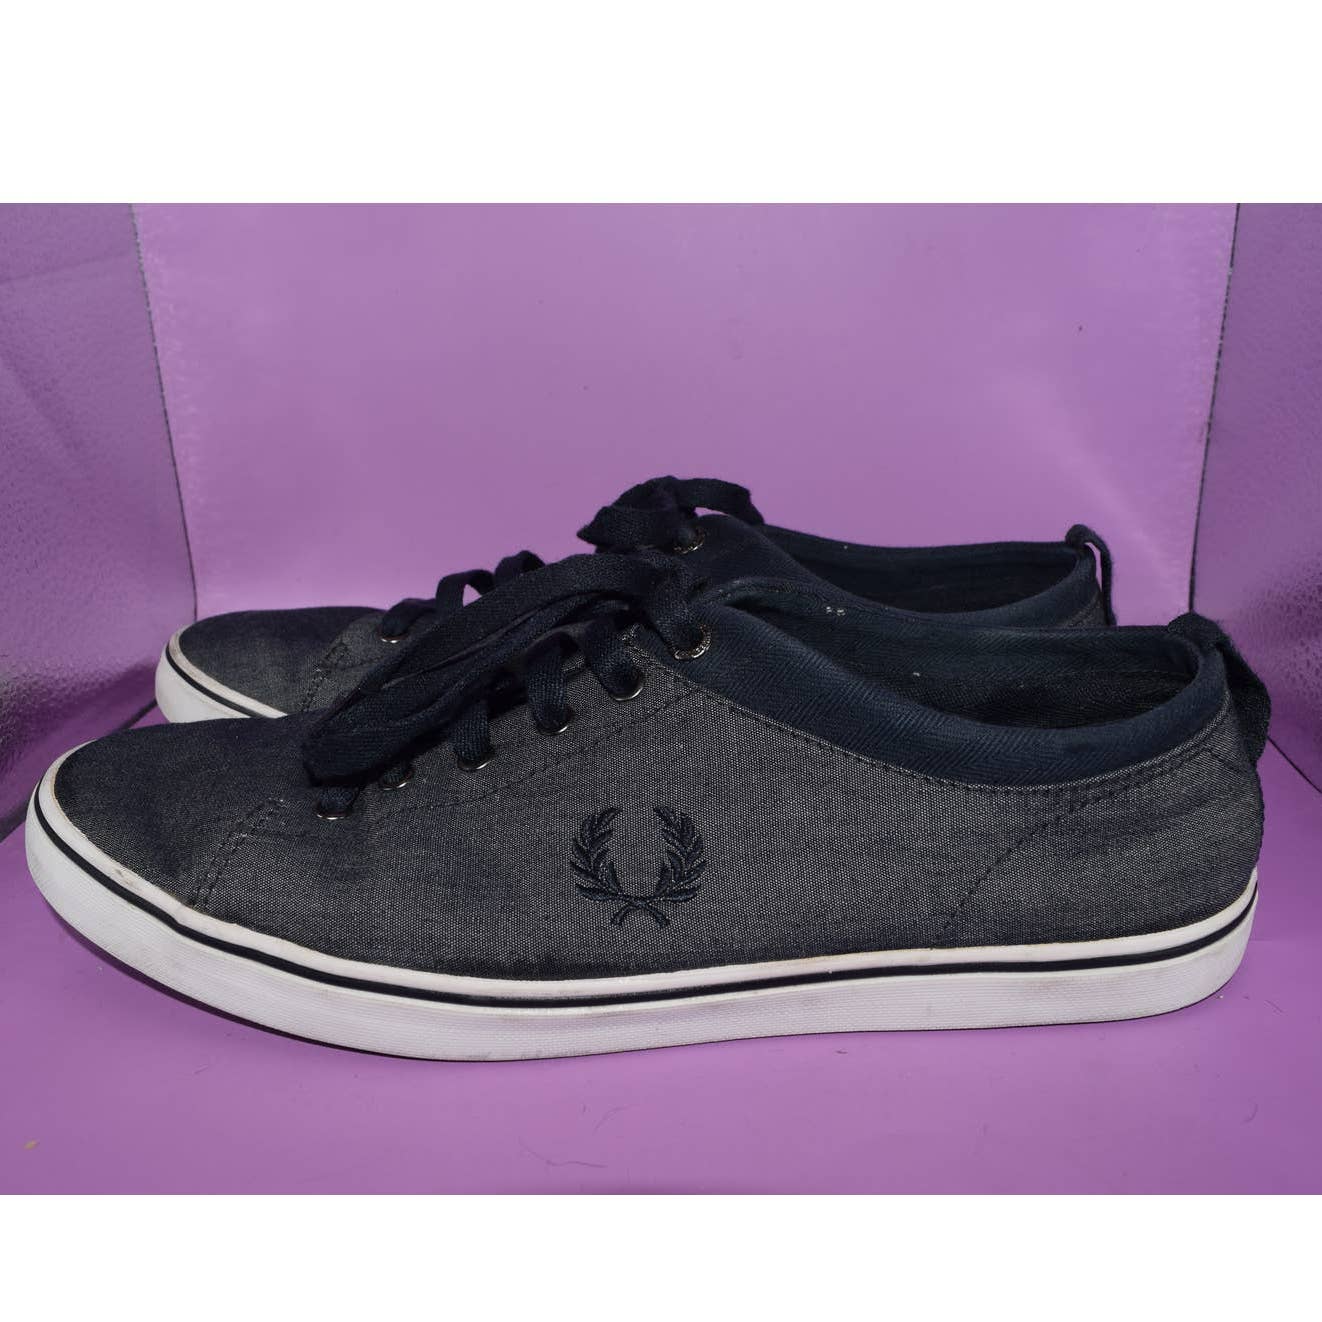 Fred Perry Chambray Blue Tennis Shoes Sneakers - 10.5